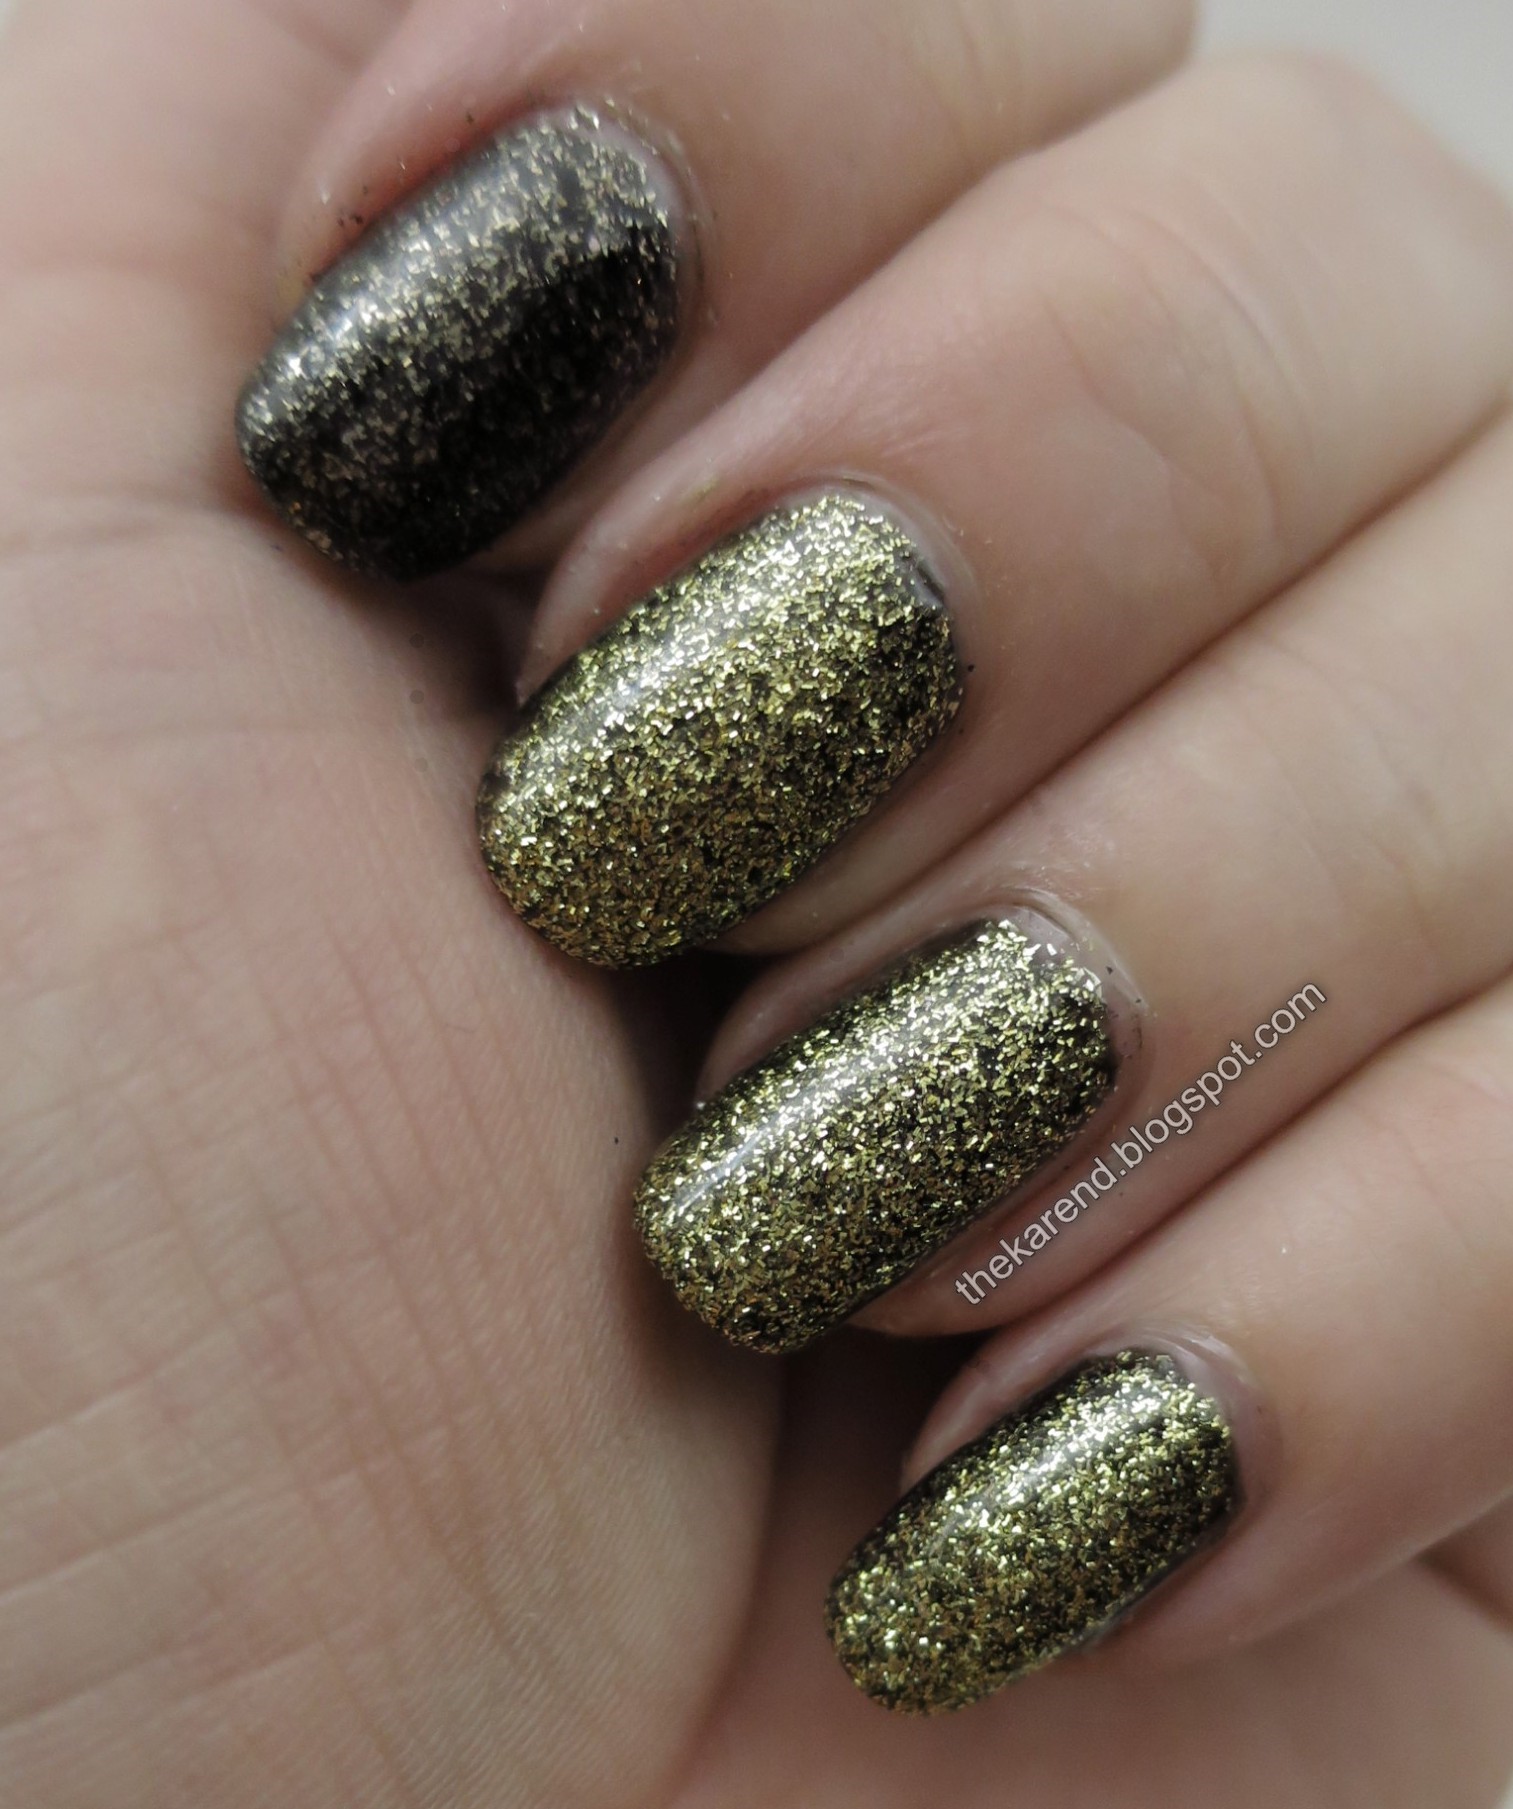 Frazzle and Aniploish: Salon Perfect Drop Dead Gore-geous Swatches